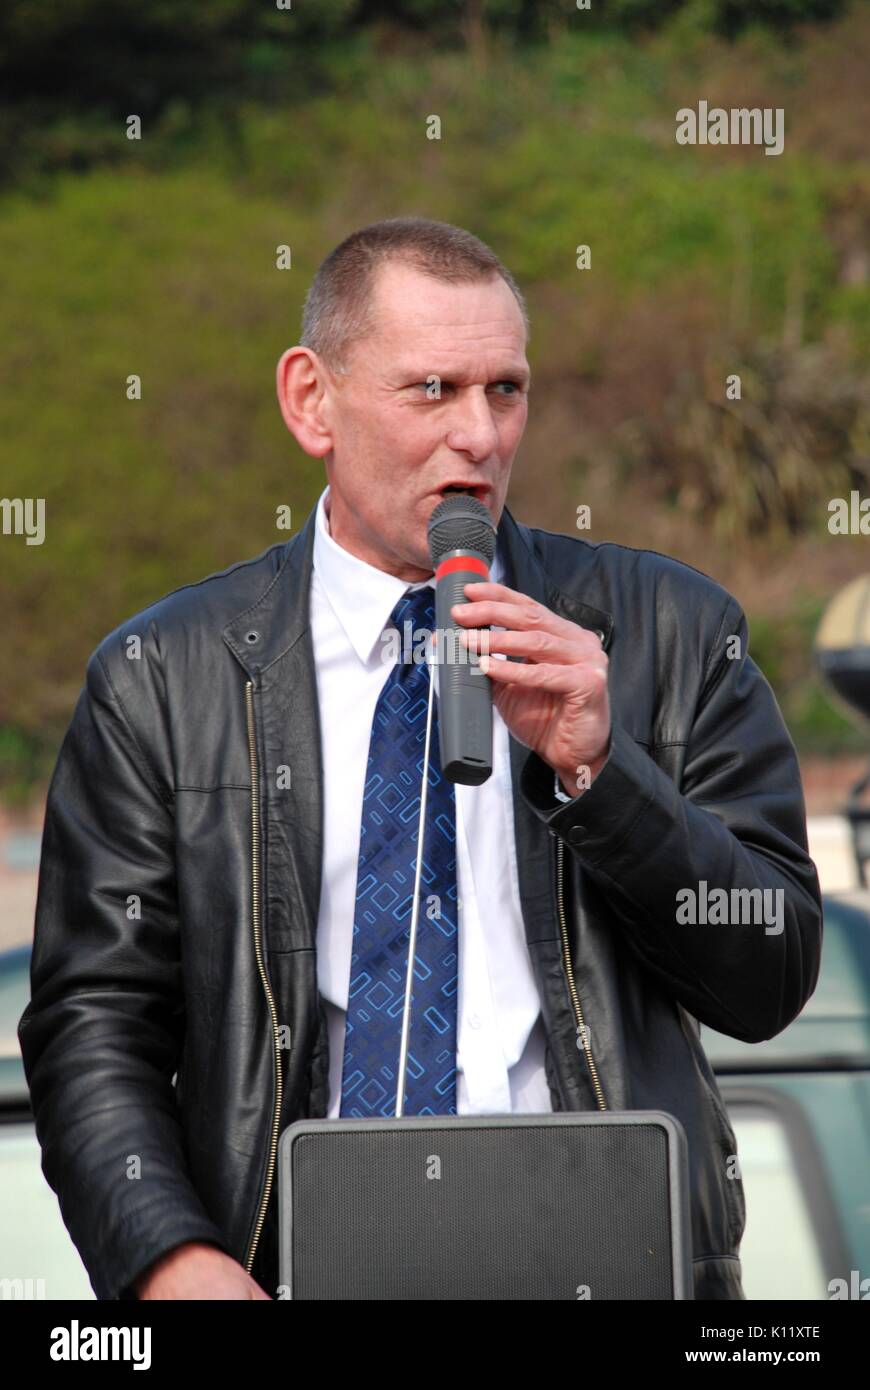 Councillor Jeremy Birch, Leader of Hastings Borough Council, speaks at a fund raising event for the pier at Hastings, England on March 12, 2011. Stock Photo